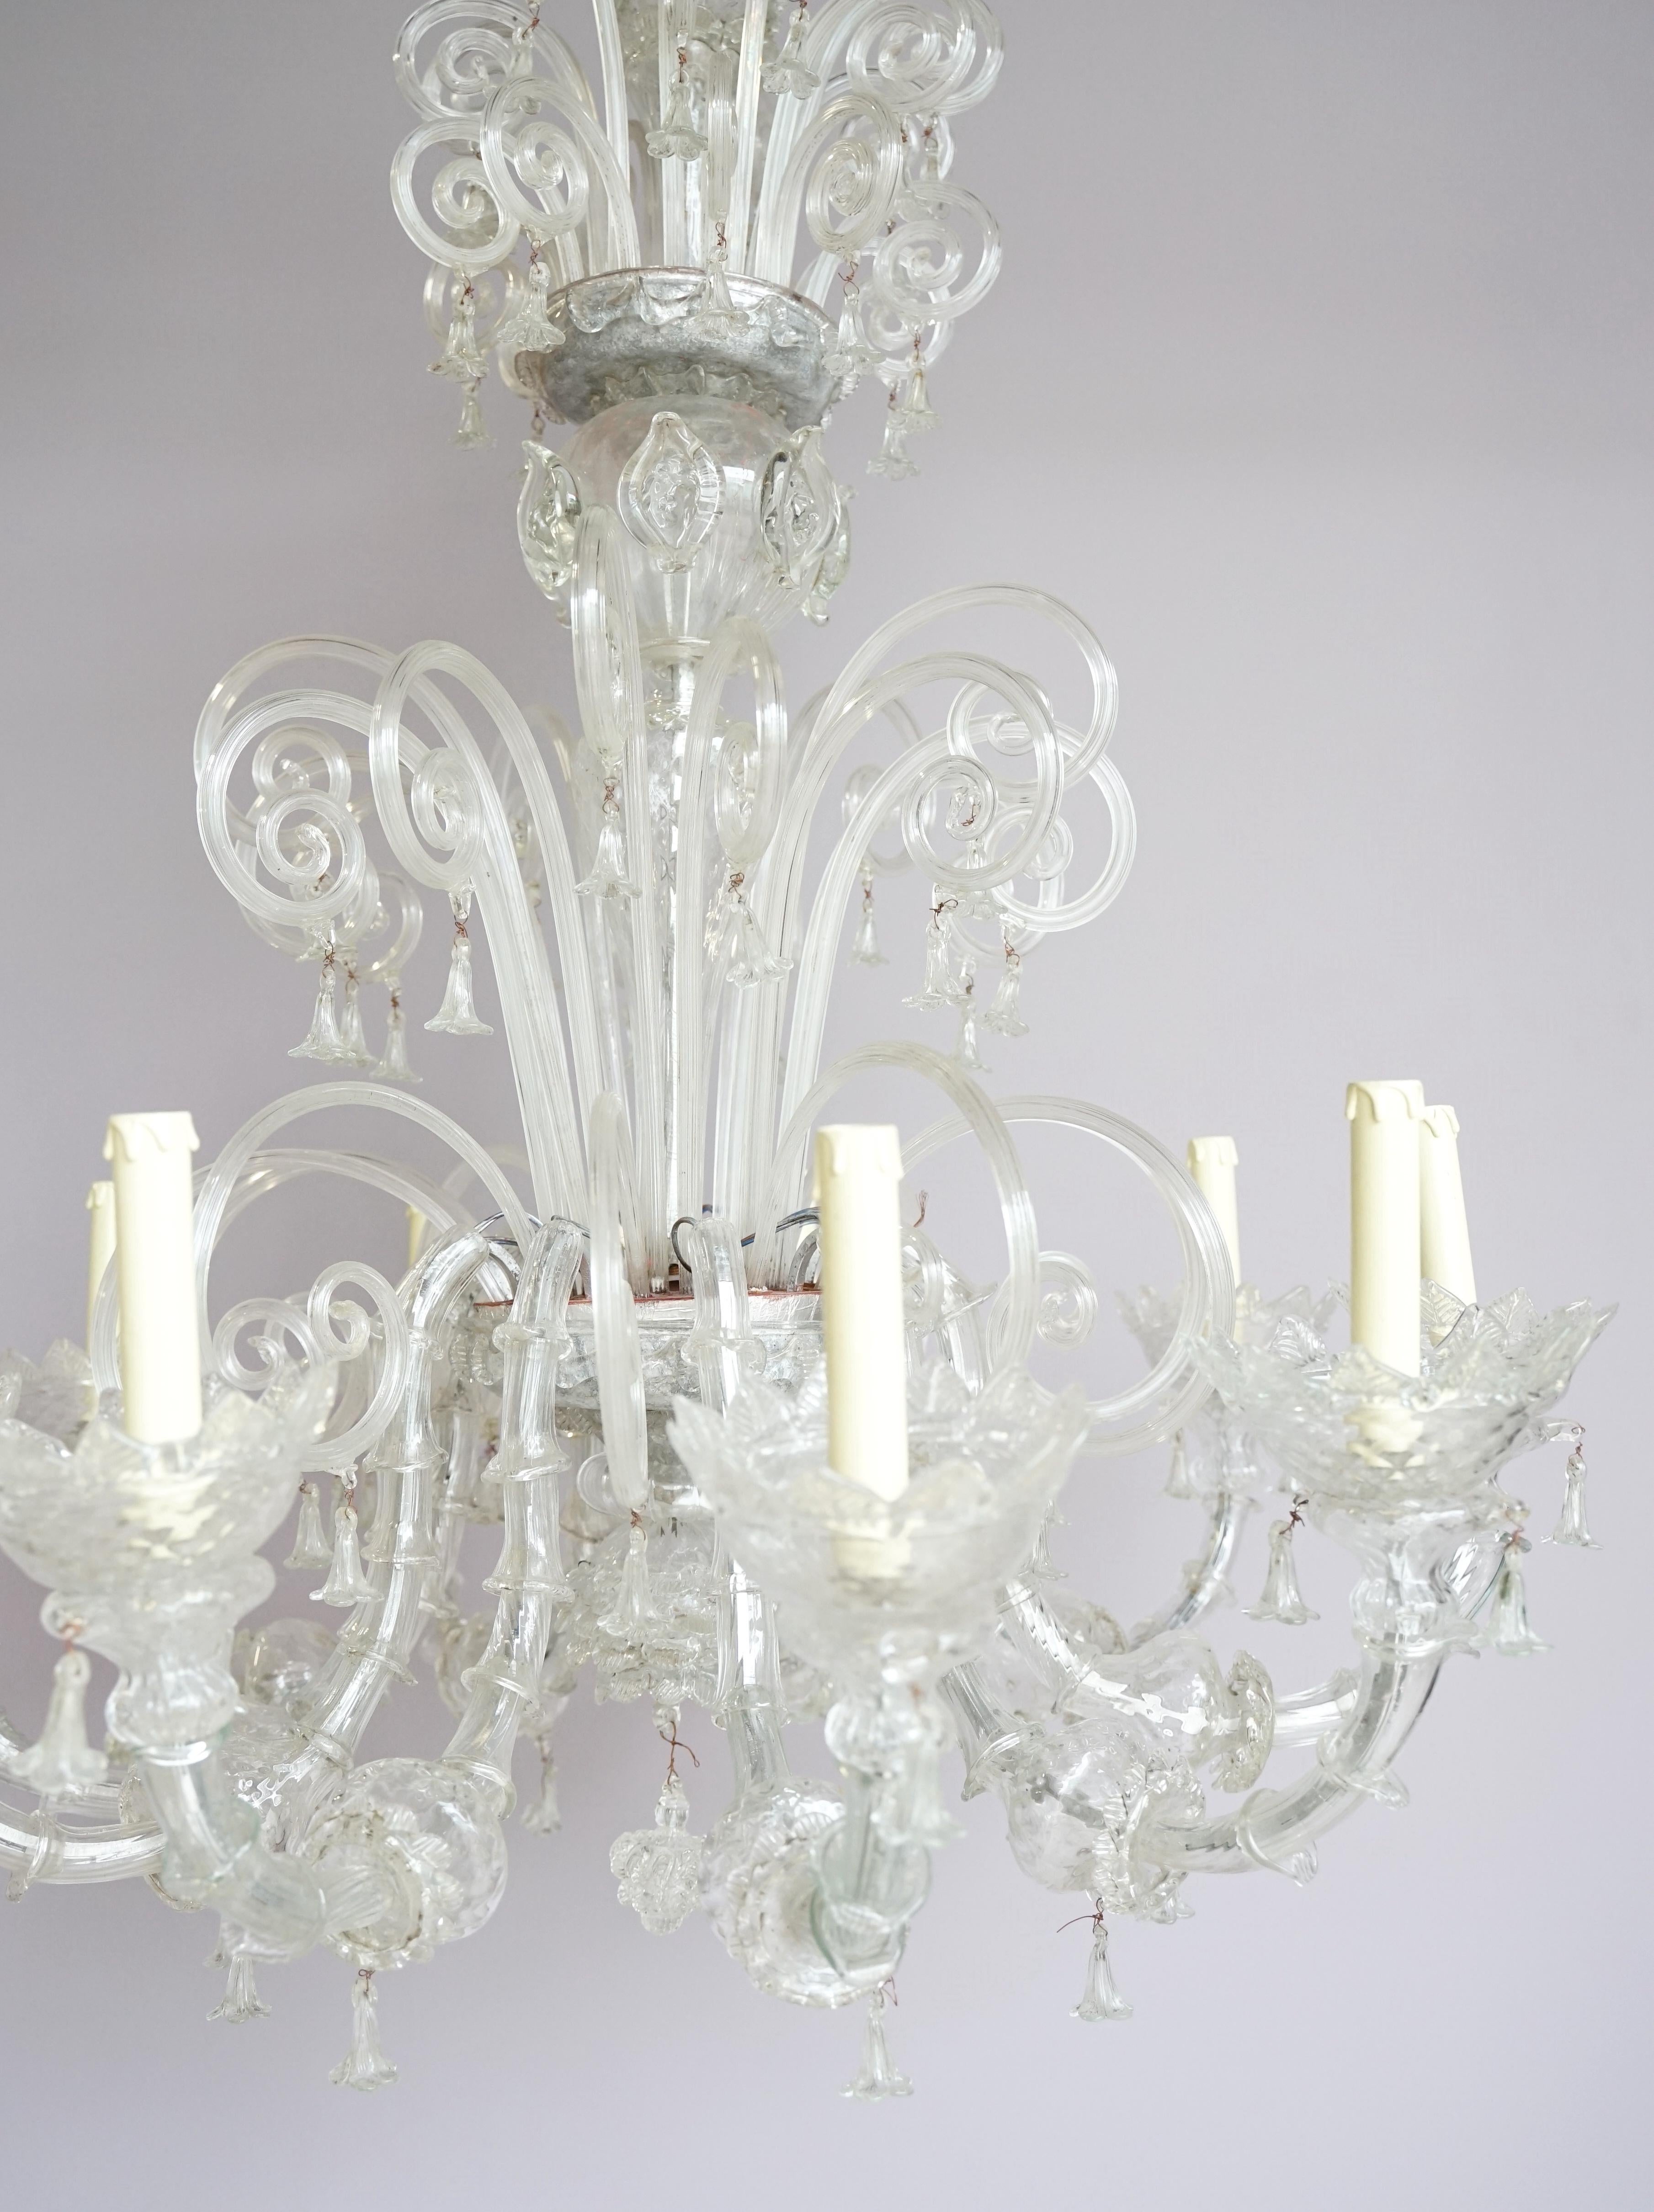 Murano Blown Glass Chandelier with 10 Lights In Excellent Condition For Sale In Badia Polesine, RO